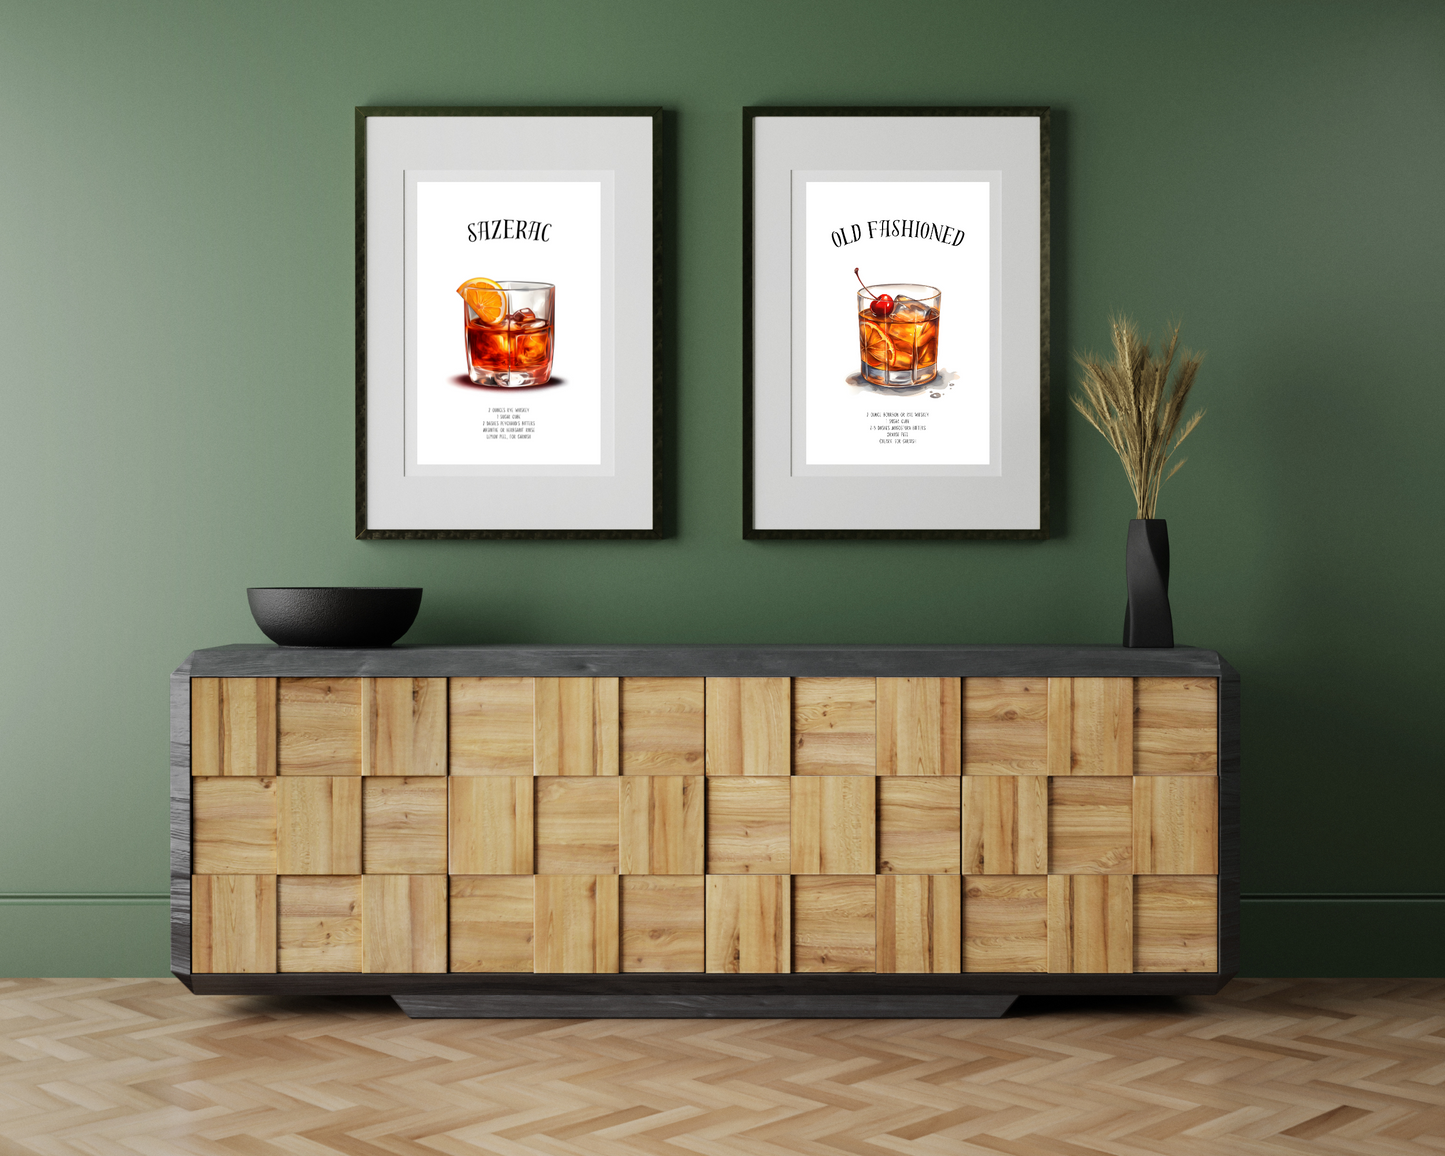 Old Fashioned Cocktail Poster Print - Pitchers Design